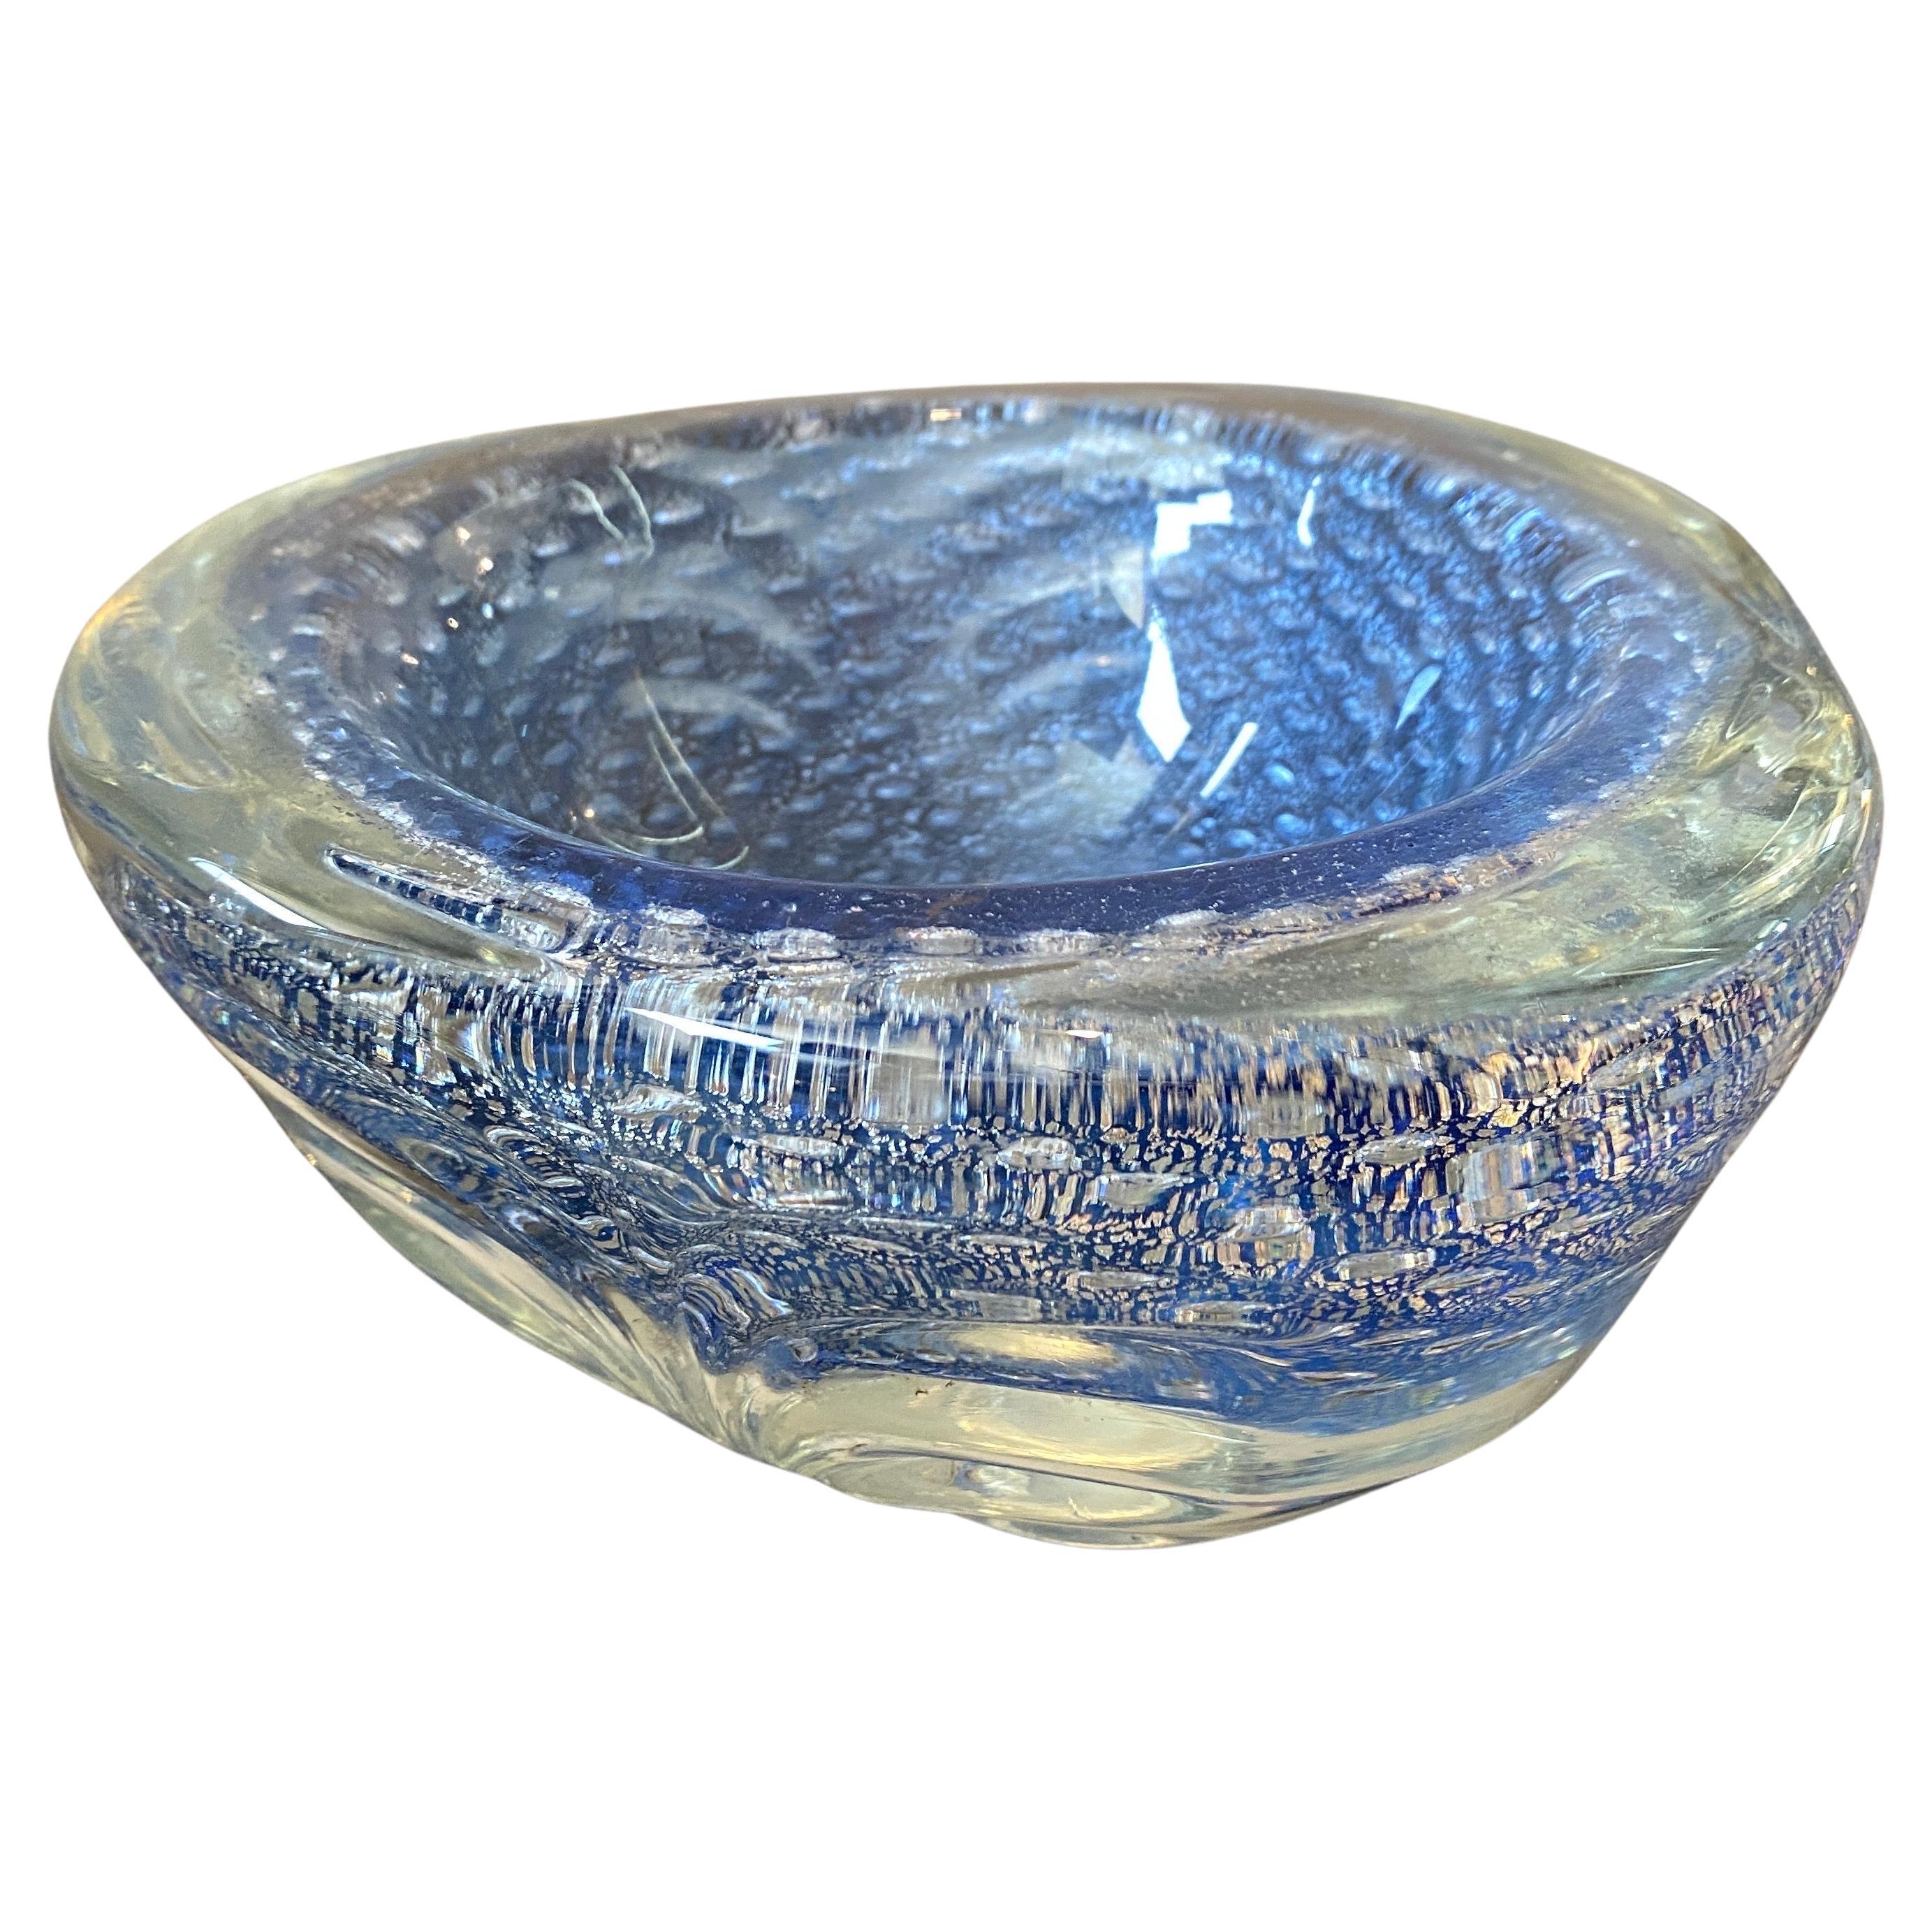 A rare blue and silver murano glass bowl designed and manufactured in the Eighties in Venice in the Eighties, it's in perfect conditions.